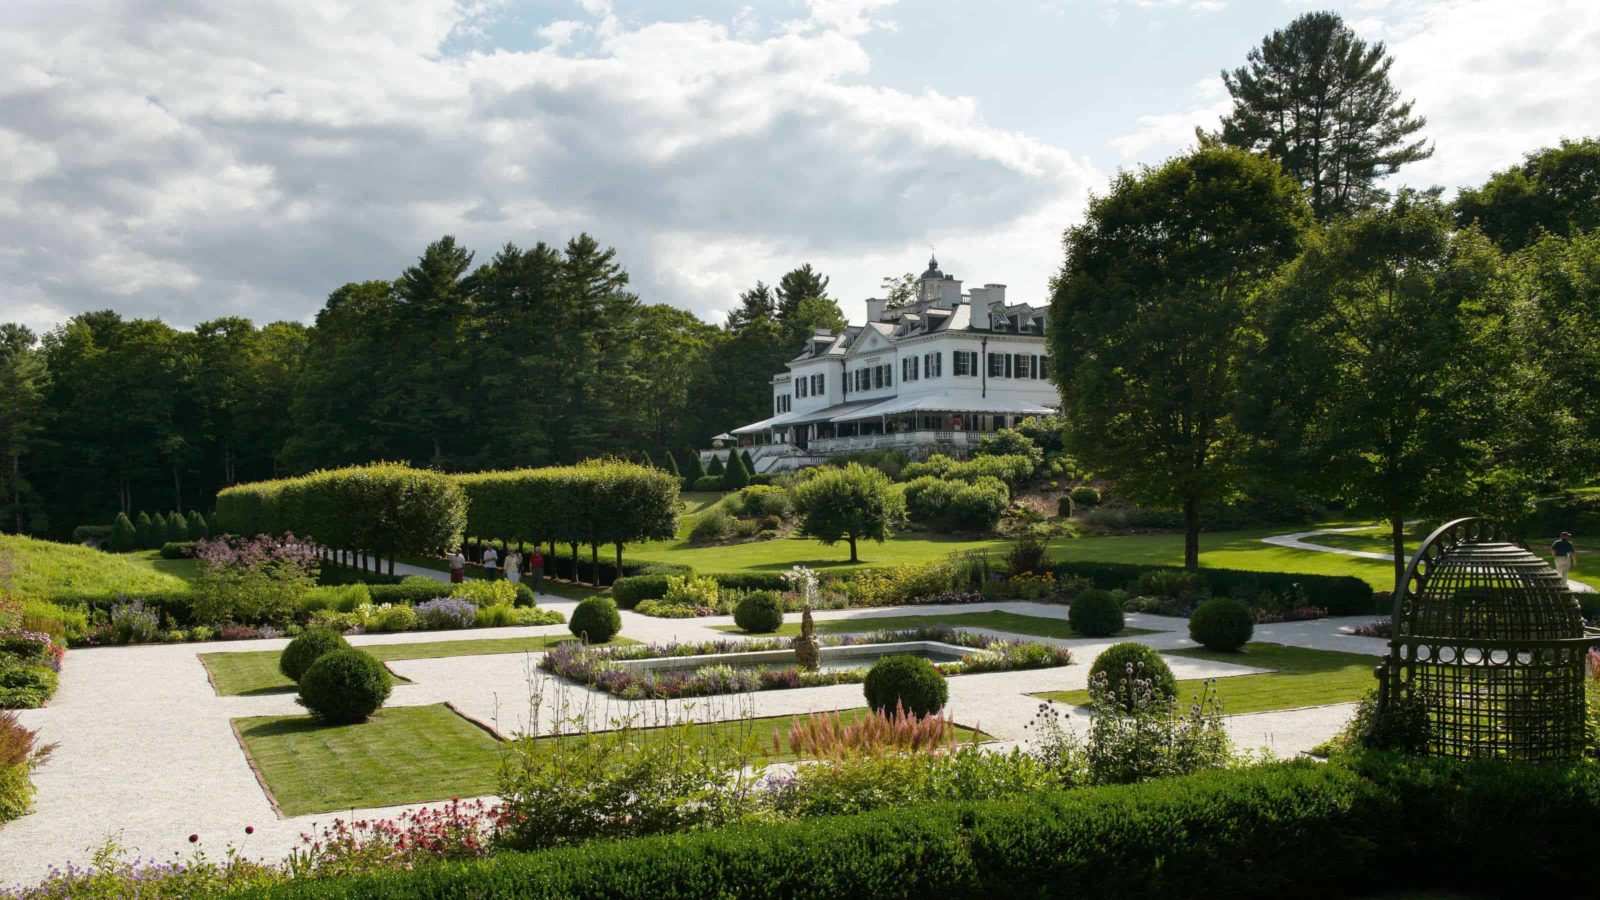 Flower beds show bright color at The Mount, Edith Wharton's historic house in Lenox.